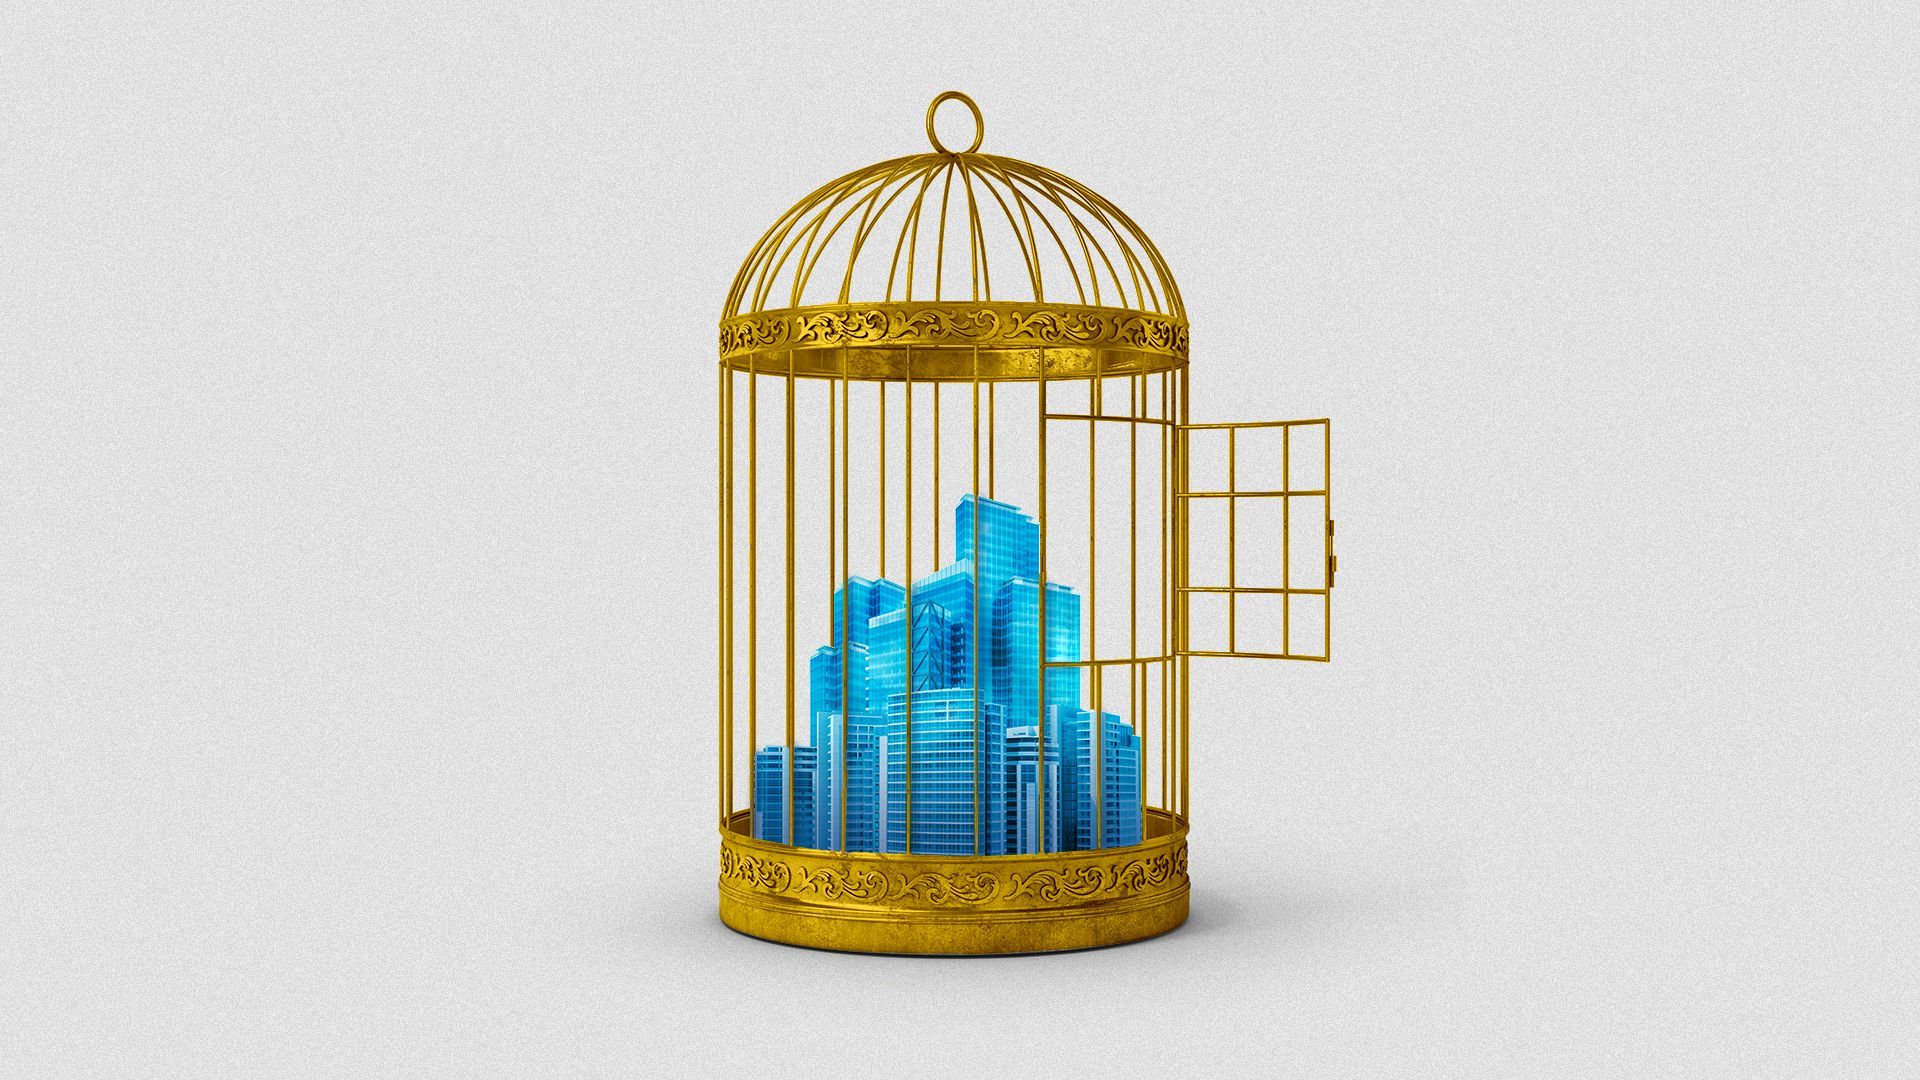 In this illustration, a city is in a golden birdcage